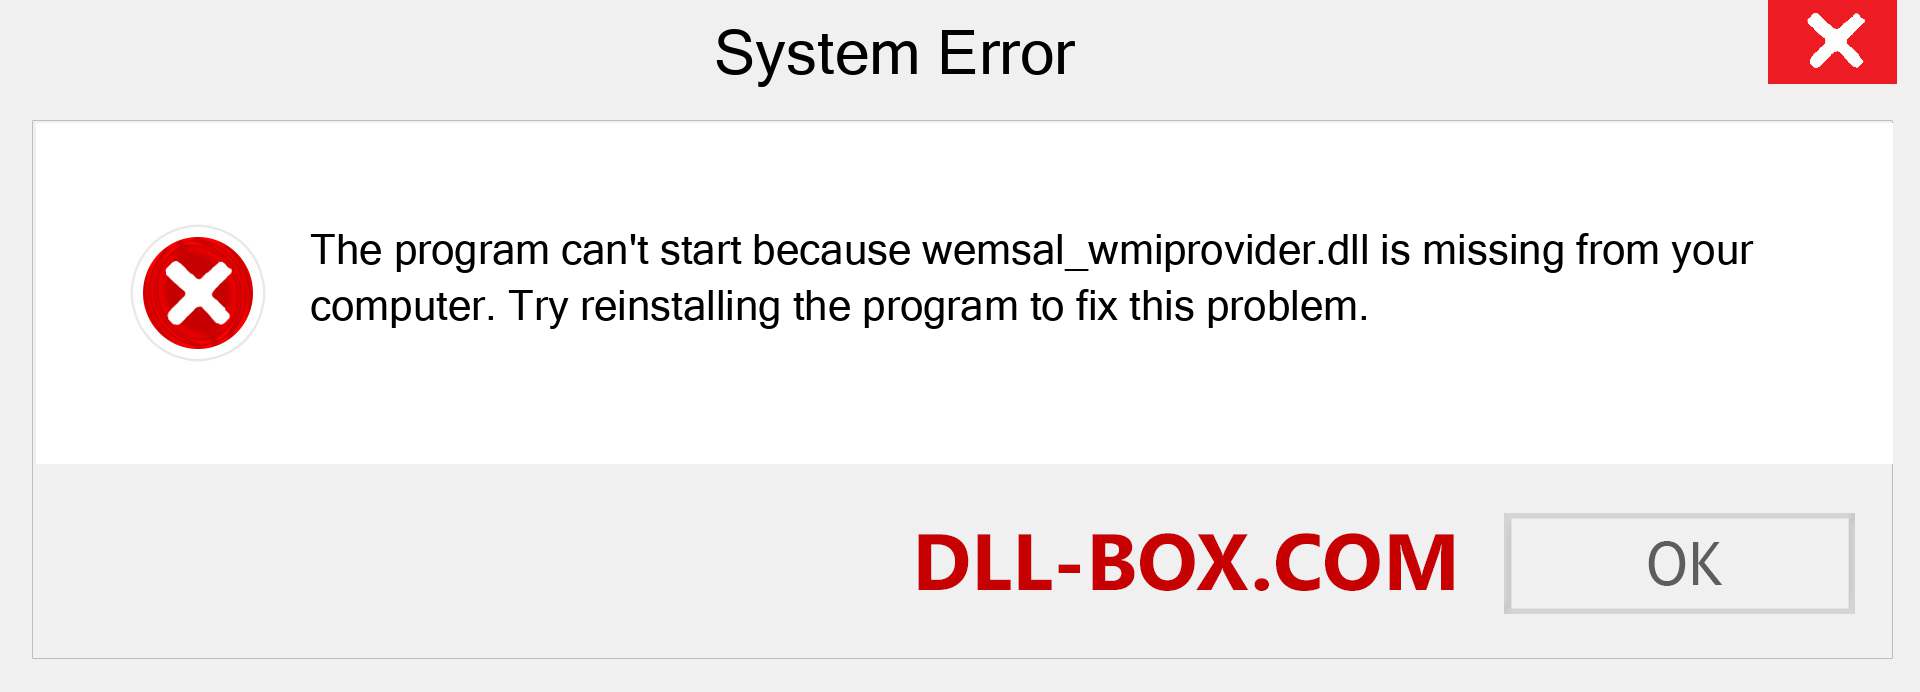  wemsal_wmiprovider.dll file is missing?. Download for Windows 7, 8, 10 - Fix  wemsal_wmiprovider dll Missing Error on Windows, photos, images